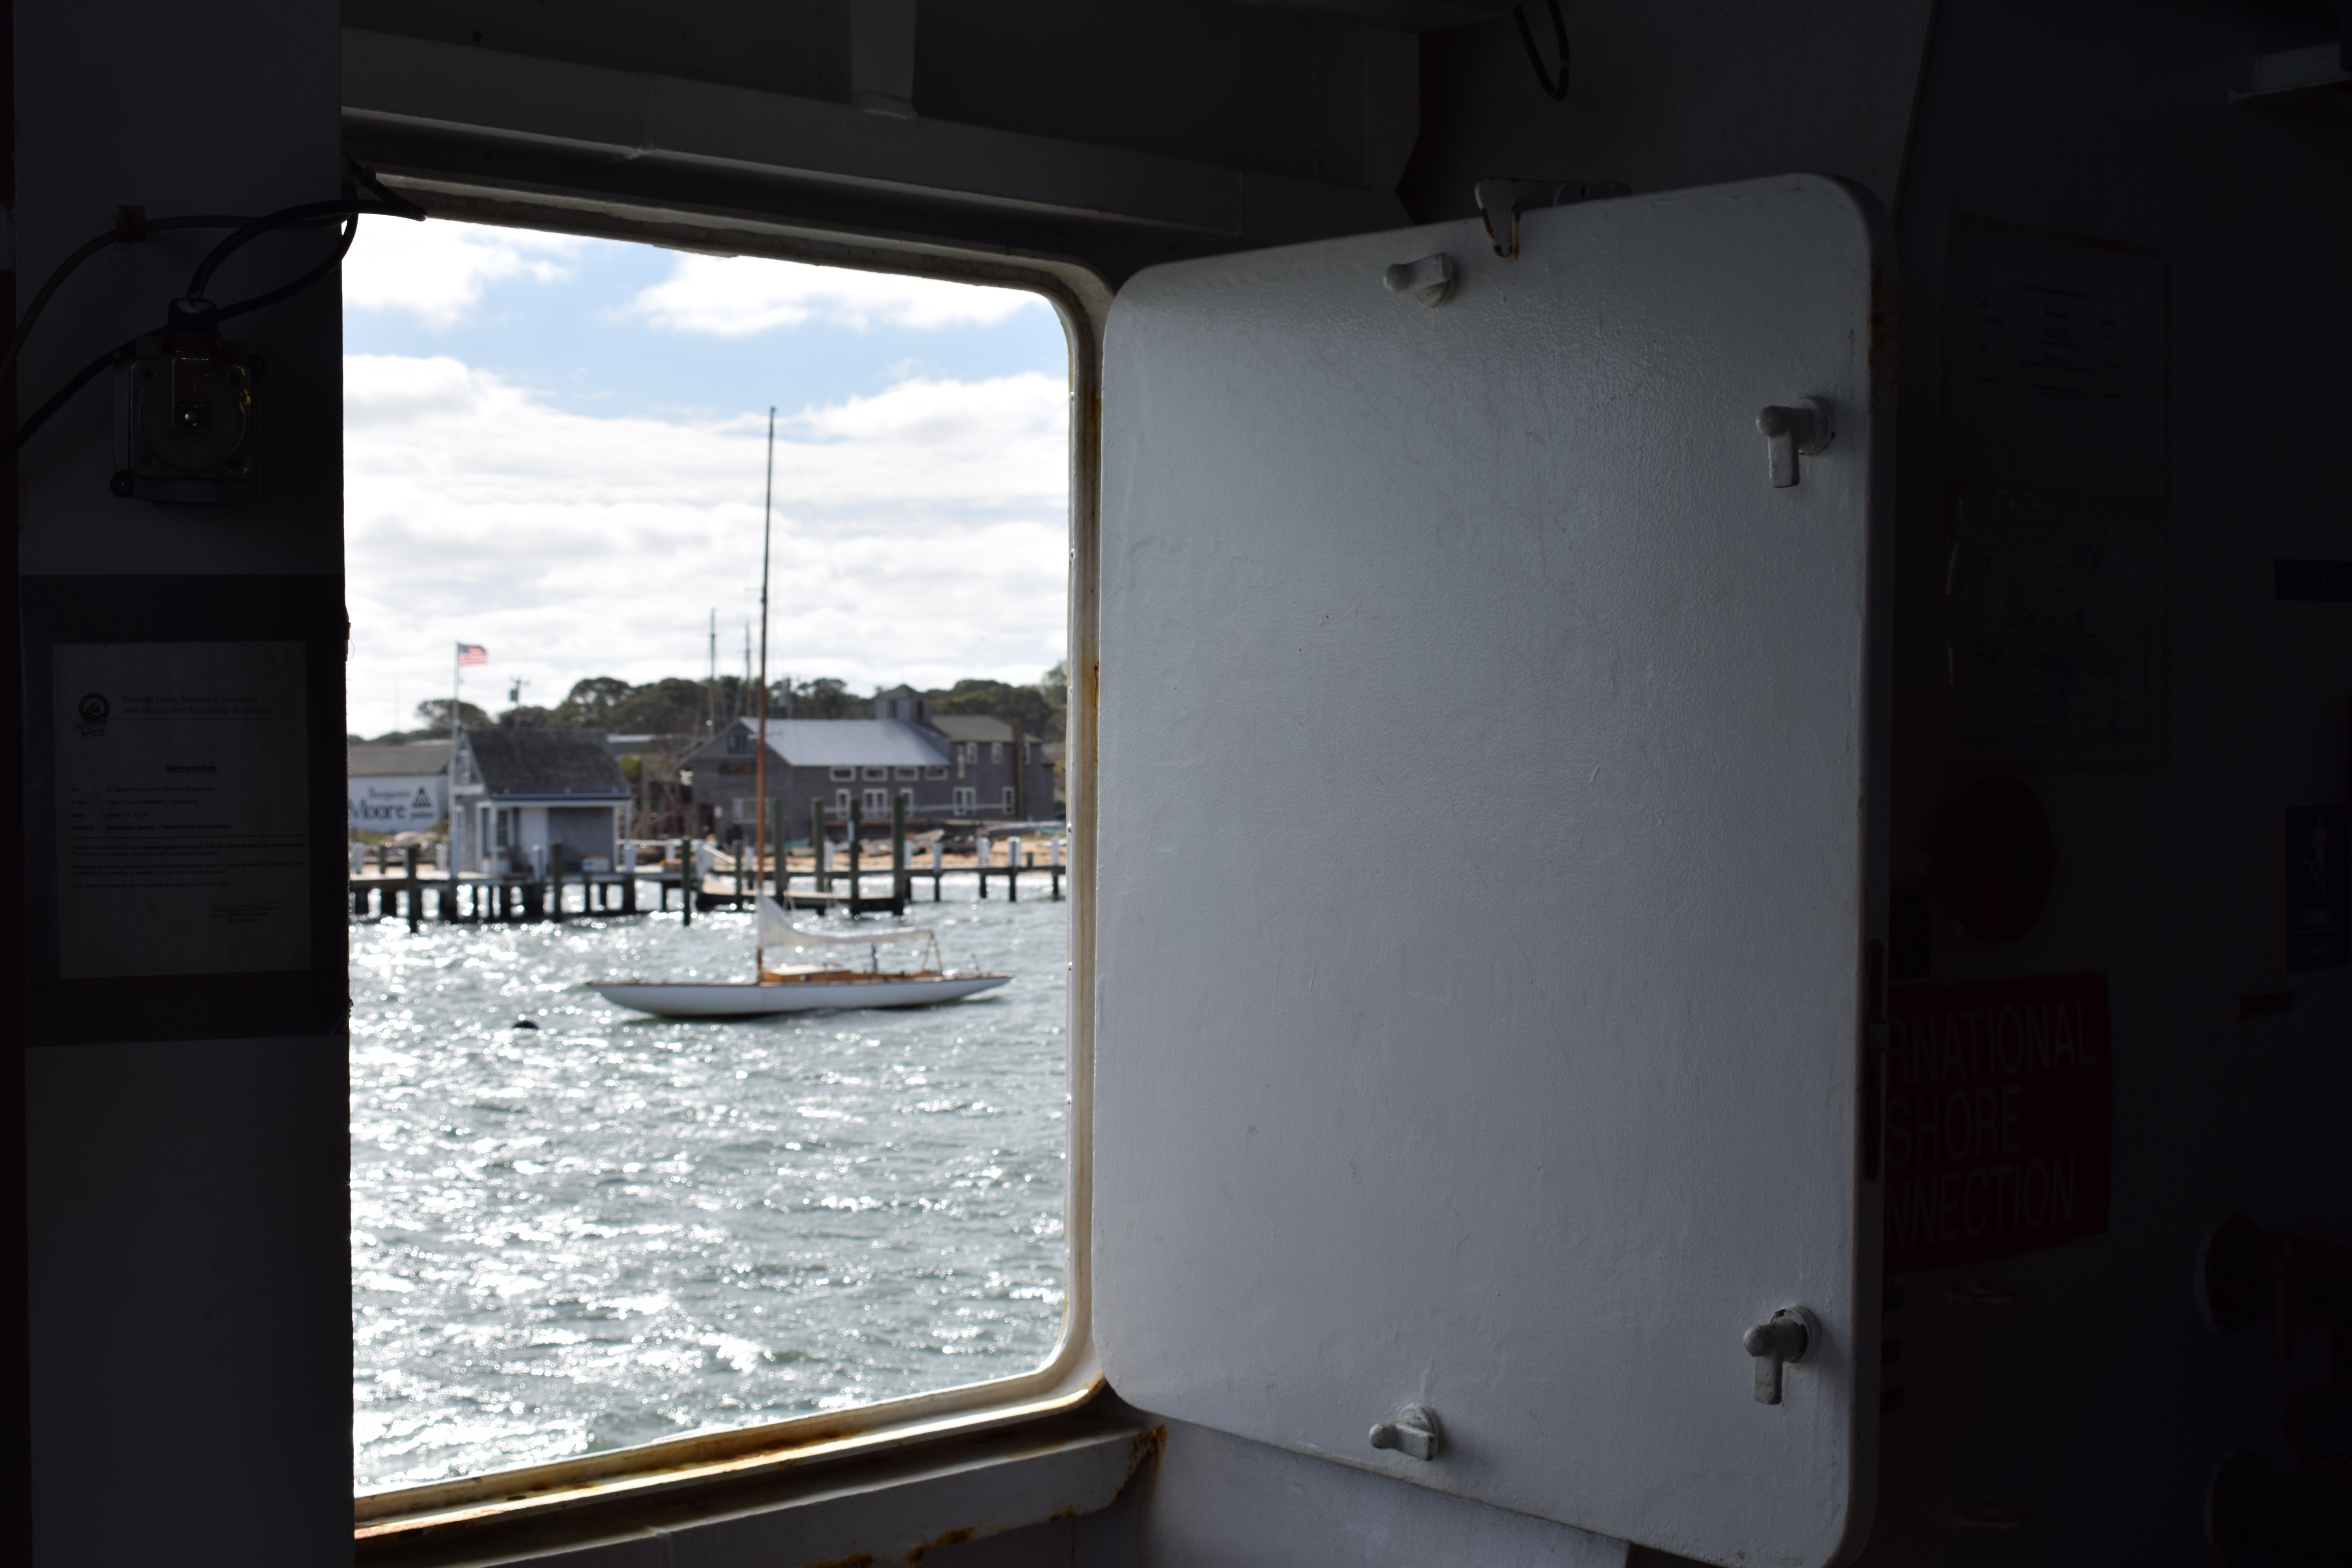 It's the weekend! Number 63, View of Vineyard Haven Harbor from the lower deck of the ferry